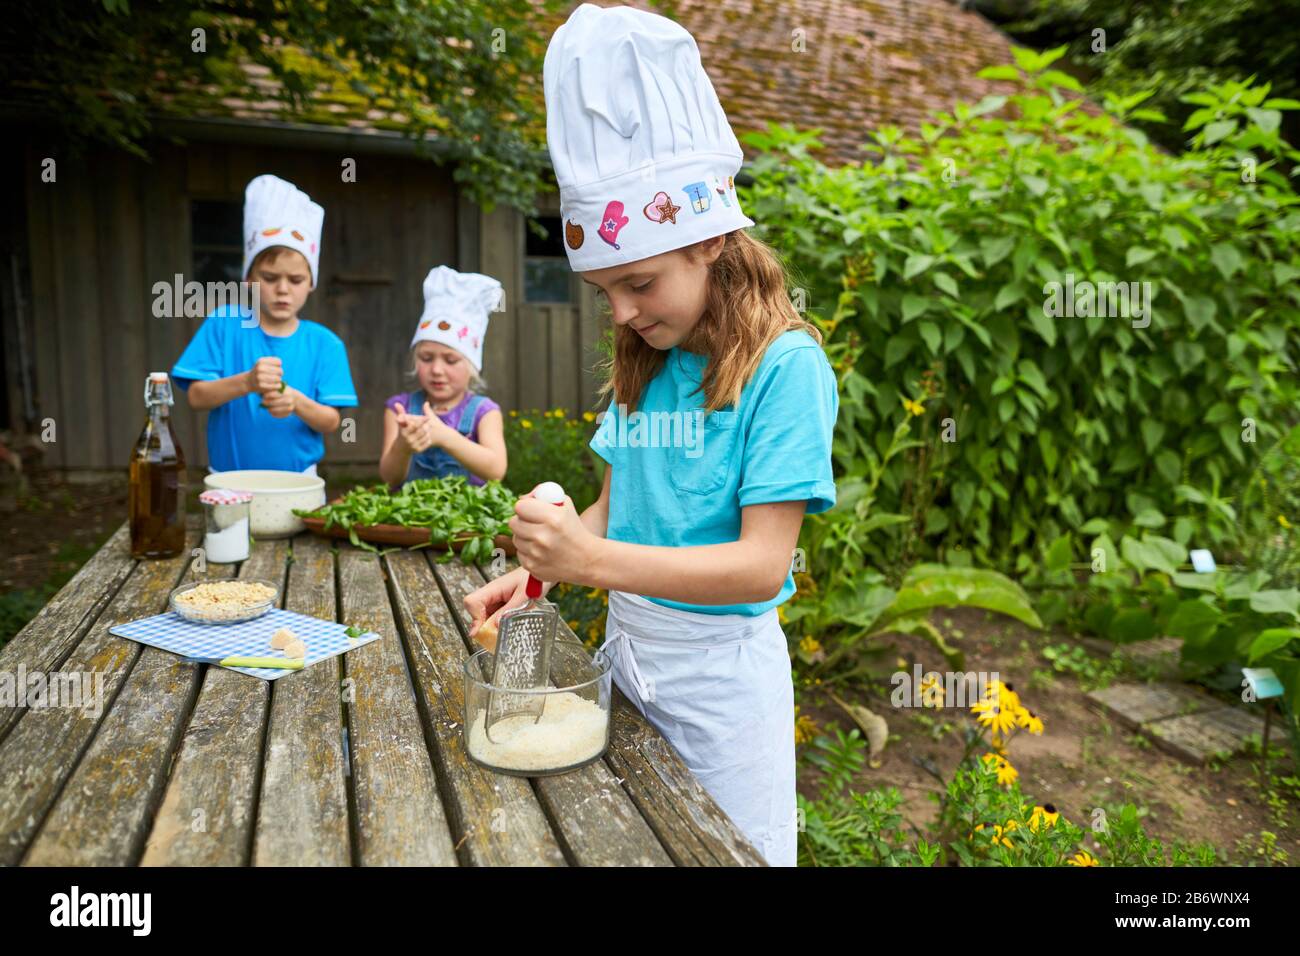 Children investigating food. Series: Making pesto, therefore grating cheese. Learning according to the Reggio Pedagogy principle, playful understanding and discovery. Germany. Stock Photo